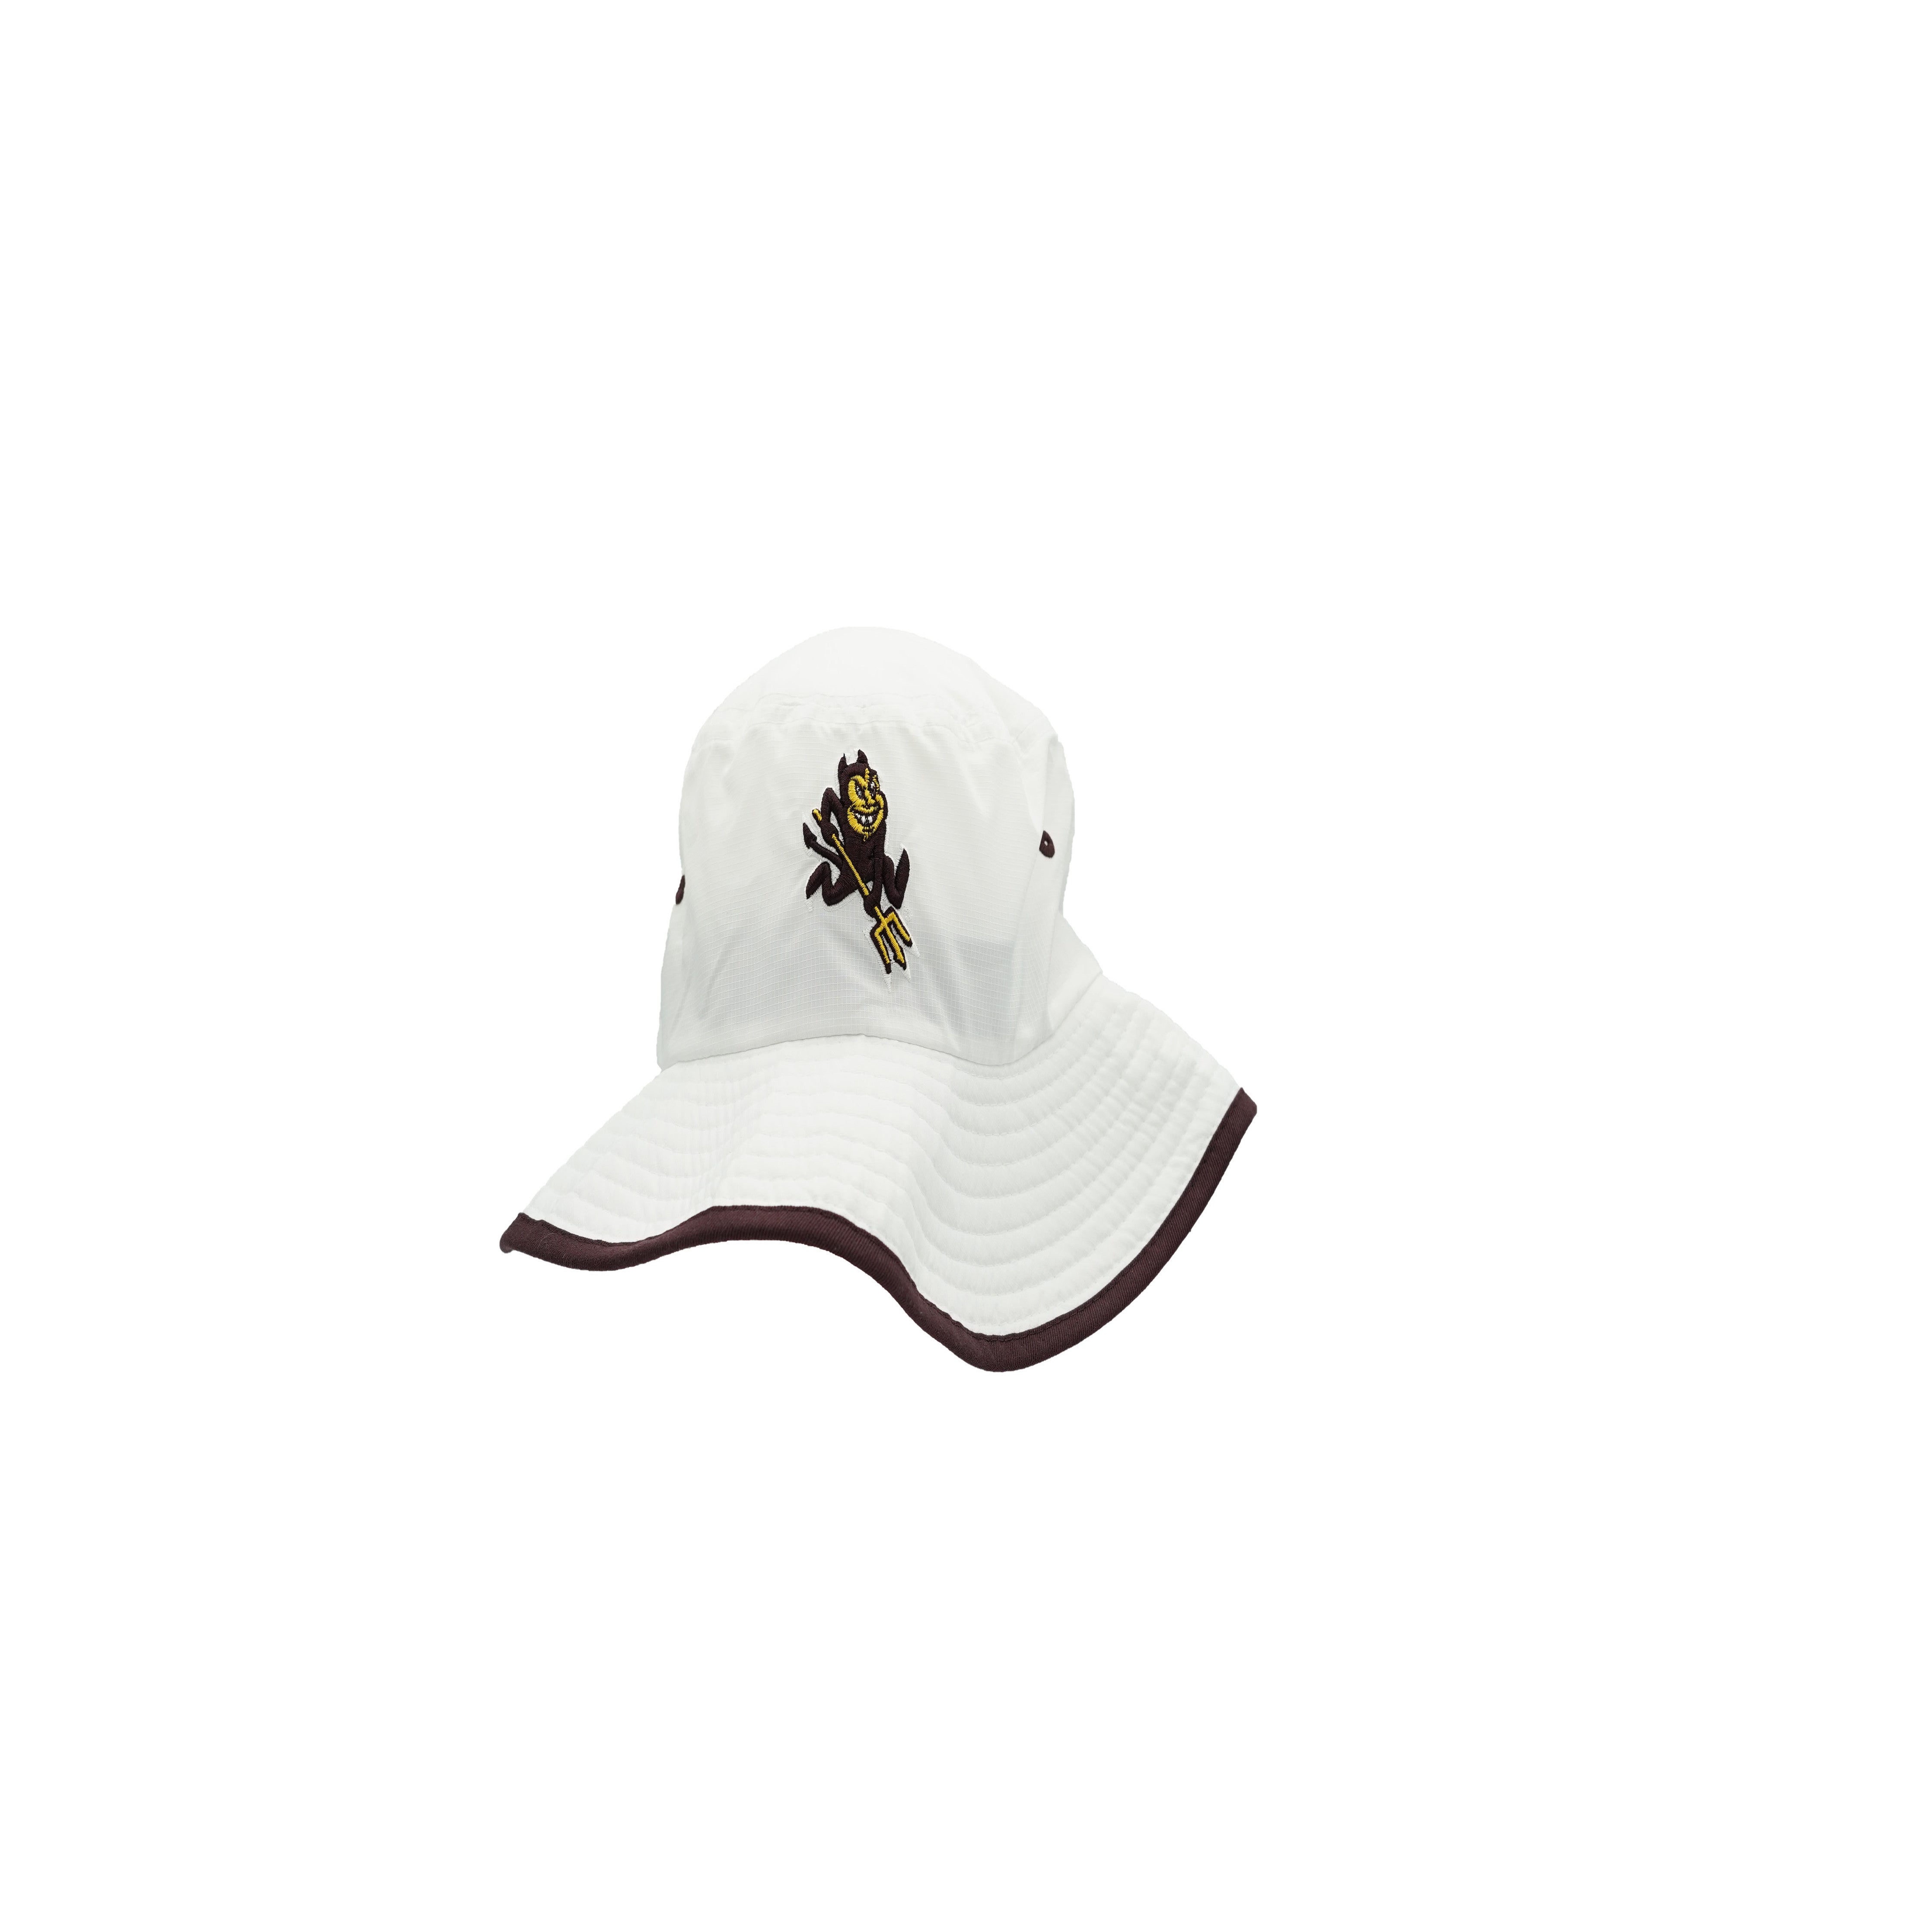 ASU Sparky Clean Up Hat GRY – Cactus Sports